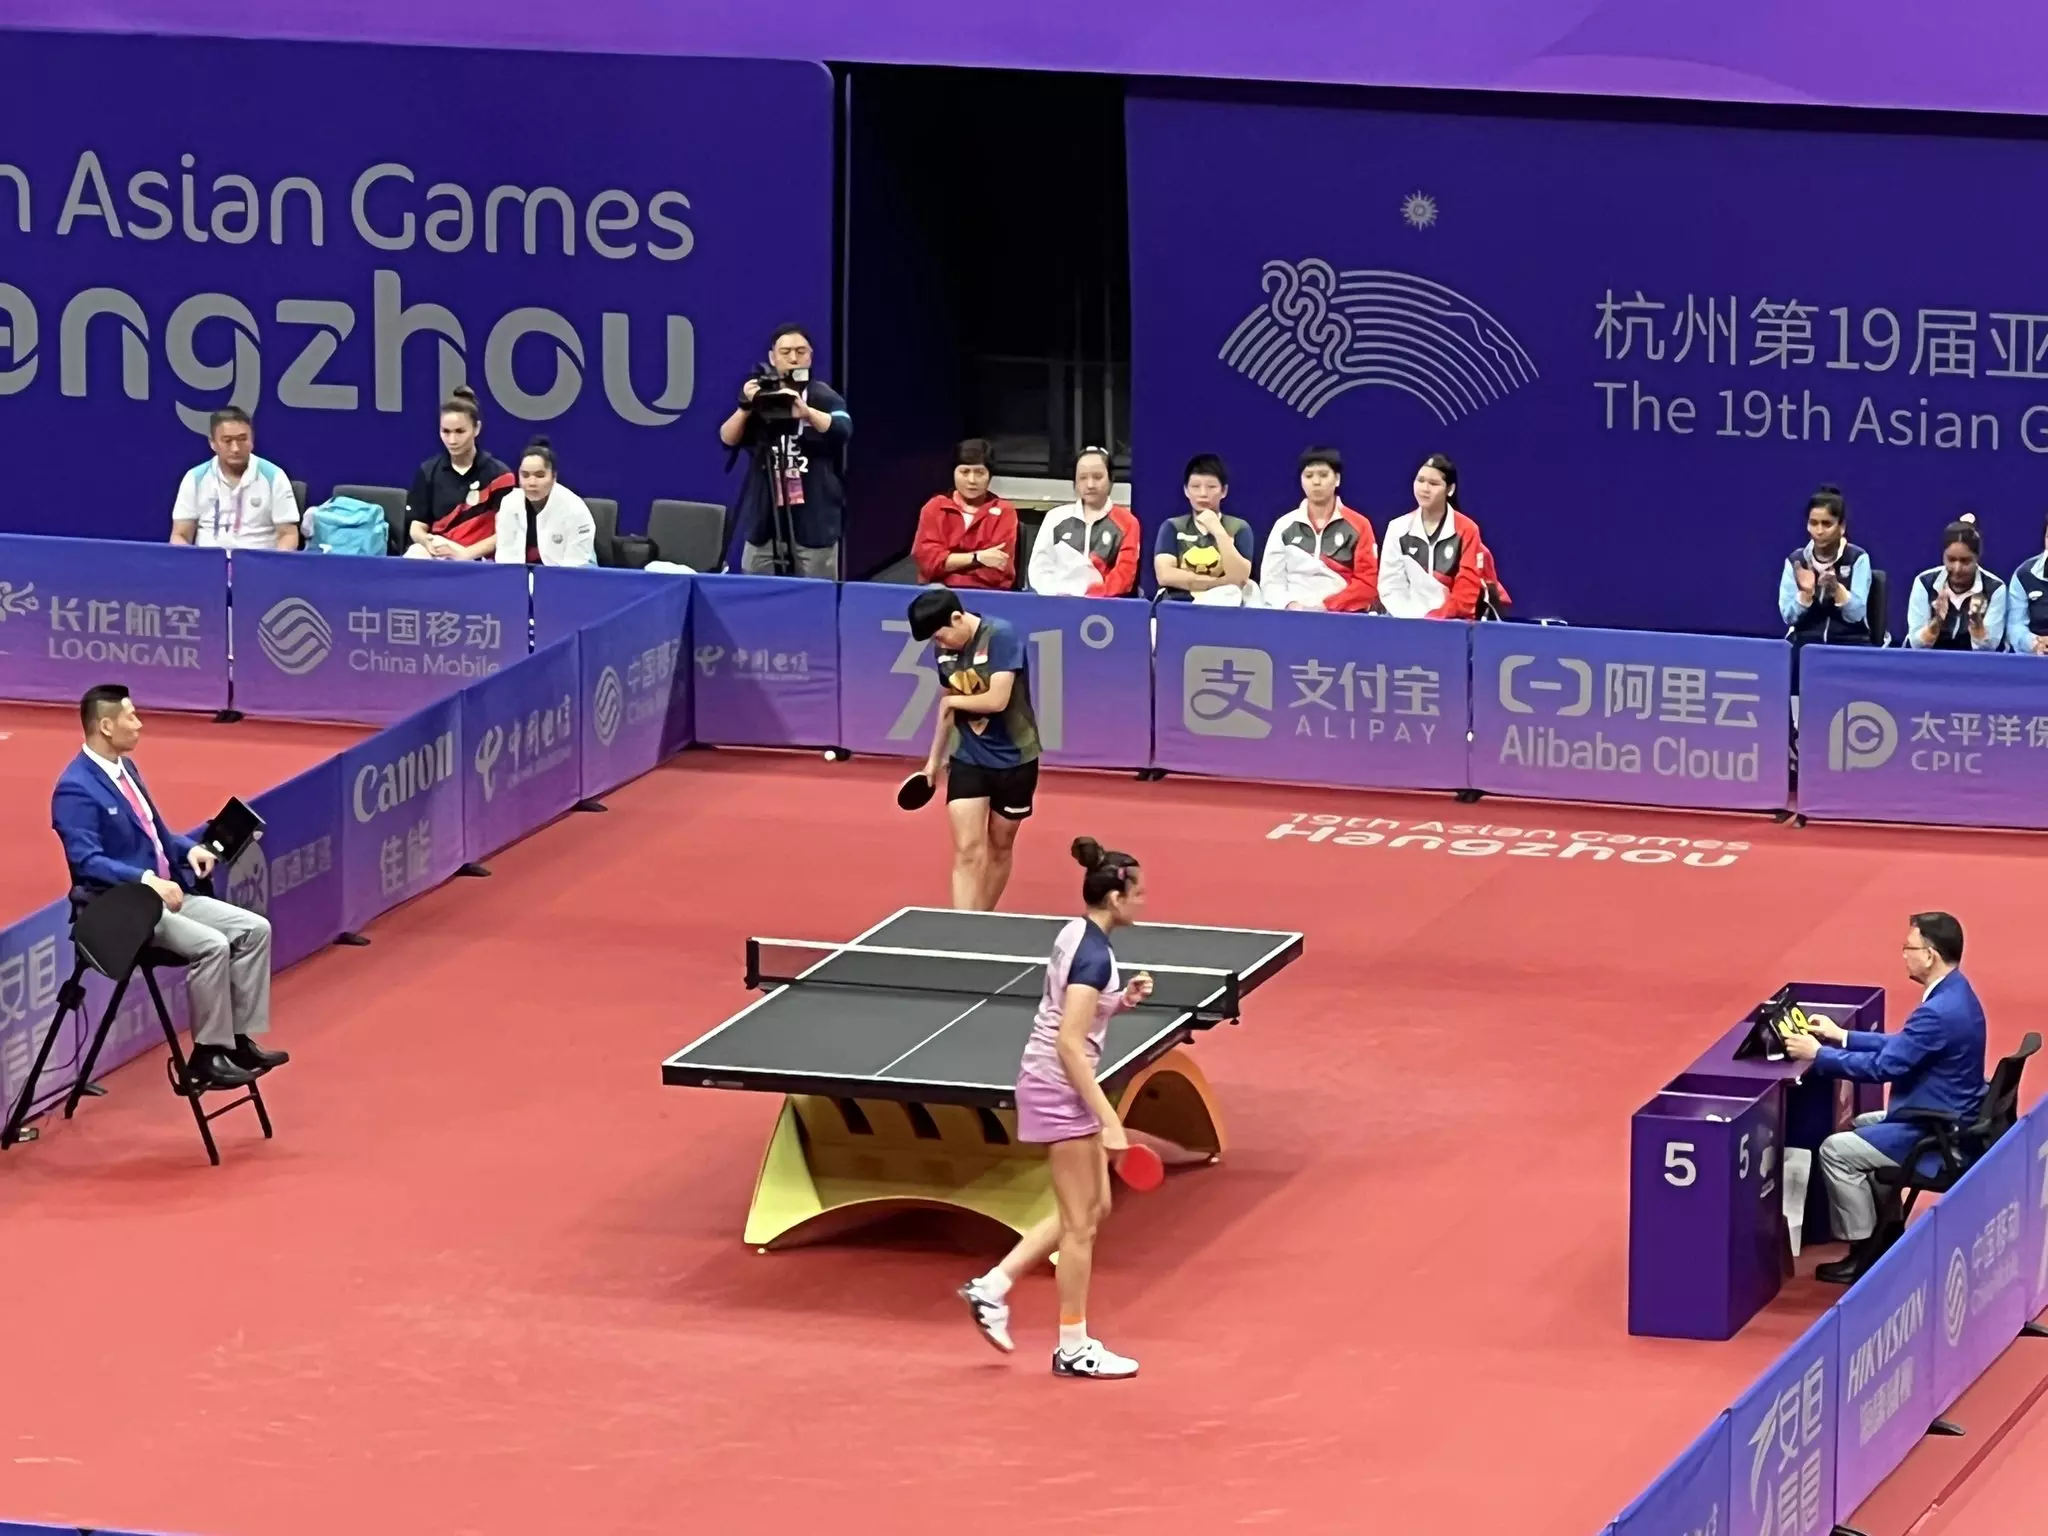 Asian Games Table Tennis Manika reaches quarters, Sreeja, Sathiyan and Sharath loses- Highlights